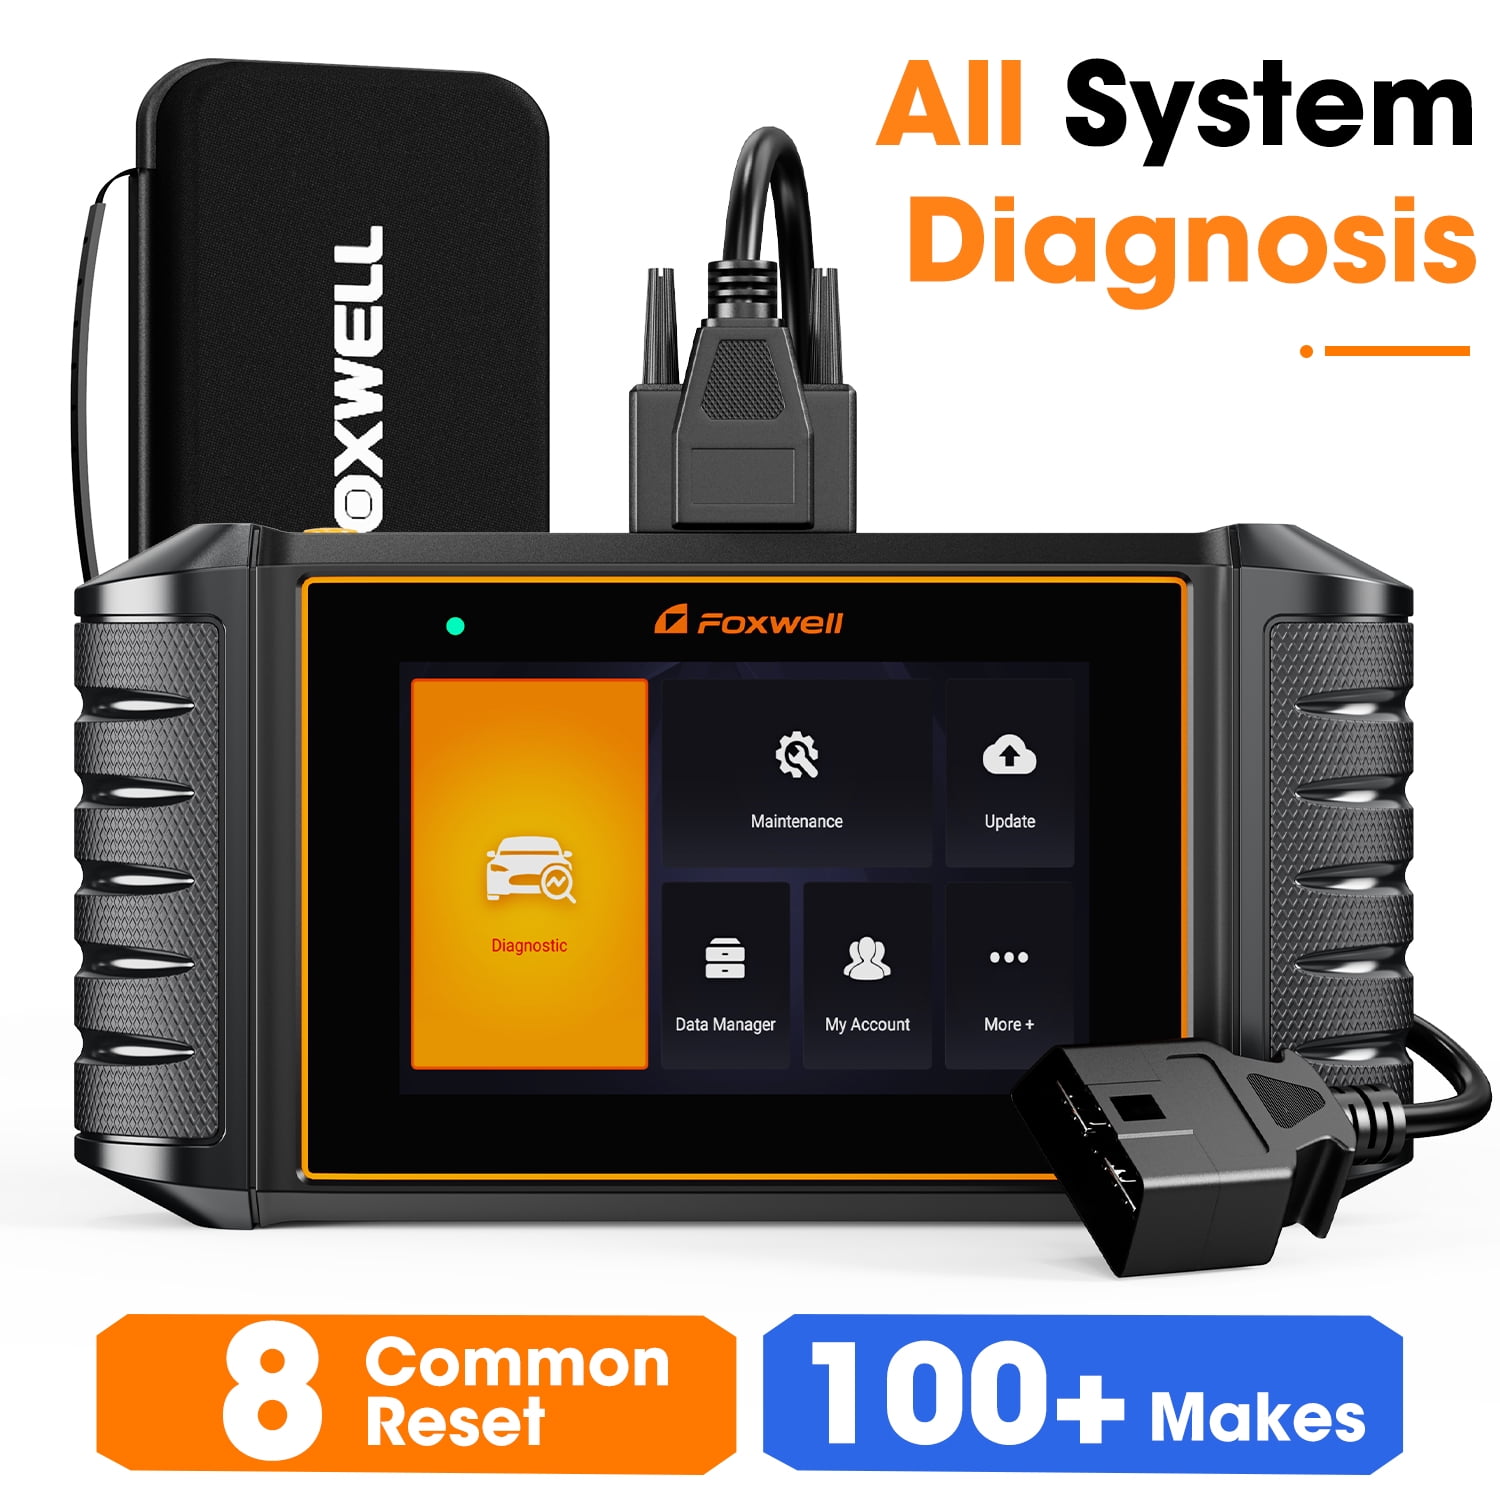 5.5” Android 9.0 Code Reader for All Car Free Lifetime Upgrade 2022 Newest Foxwell NT726 OBD2 Scanner All System Diagnostic Scan Tool with ABS Bleeding/Oil Reset/EPB/TPS/SAS/TPMS-8 Hot Service Reset 